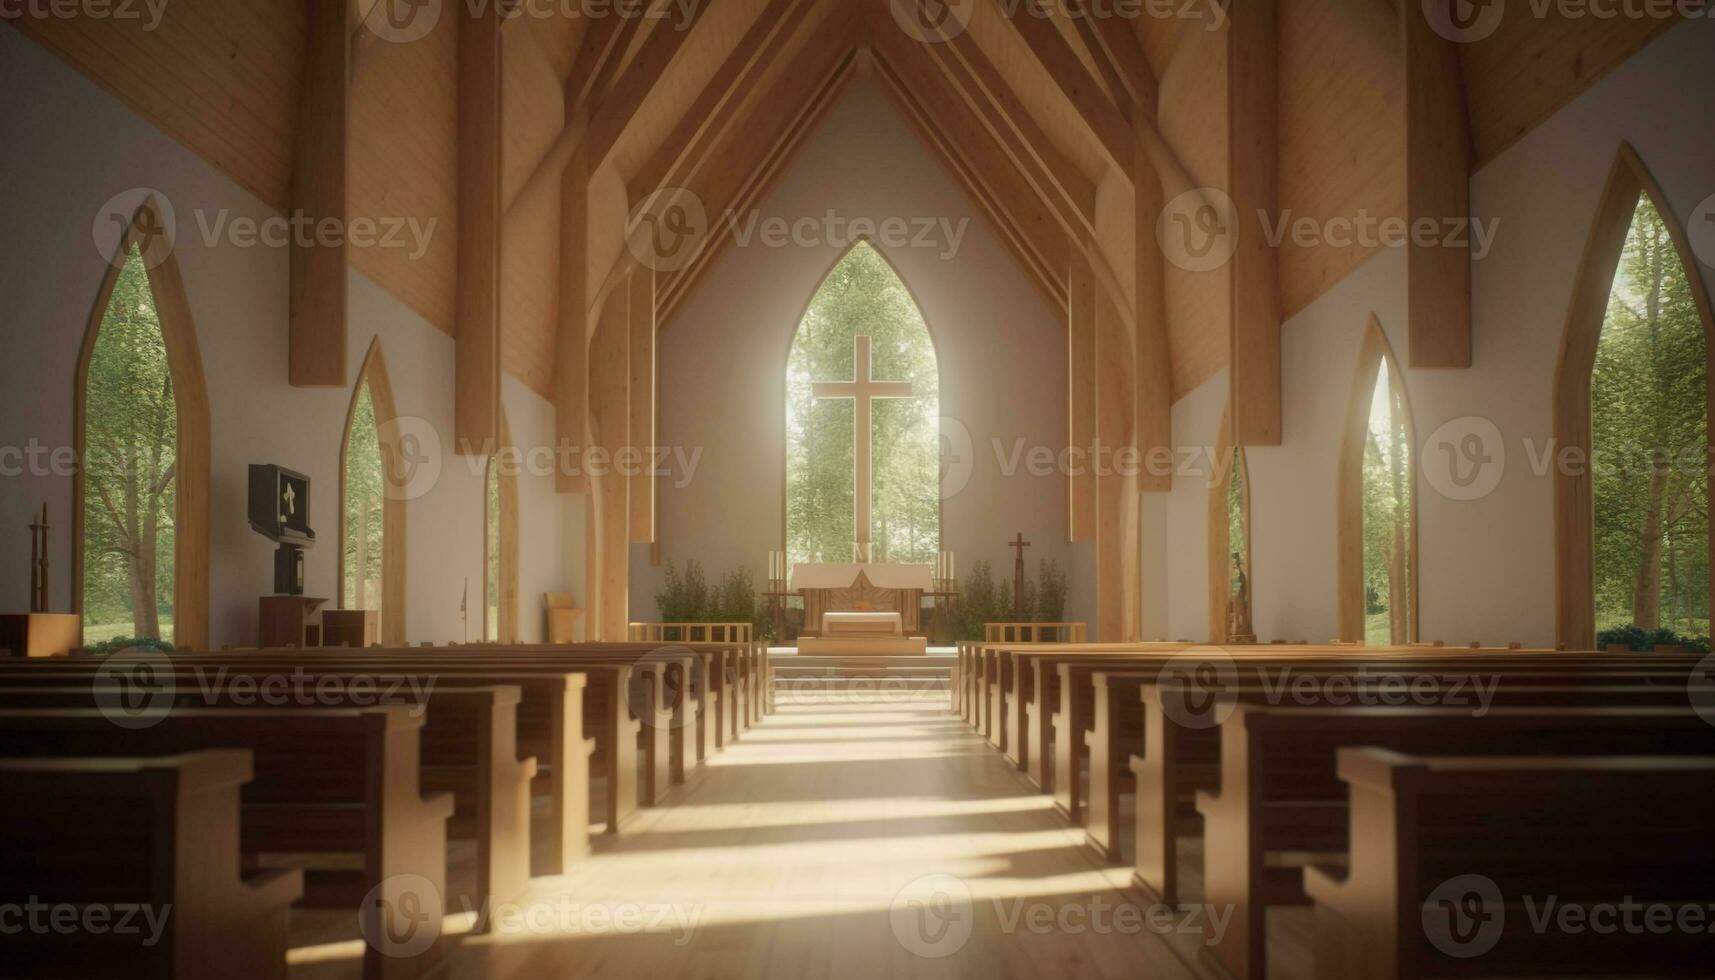 Inside the old chapel, praying in silence, surrounded by history generated by AI photo